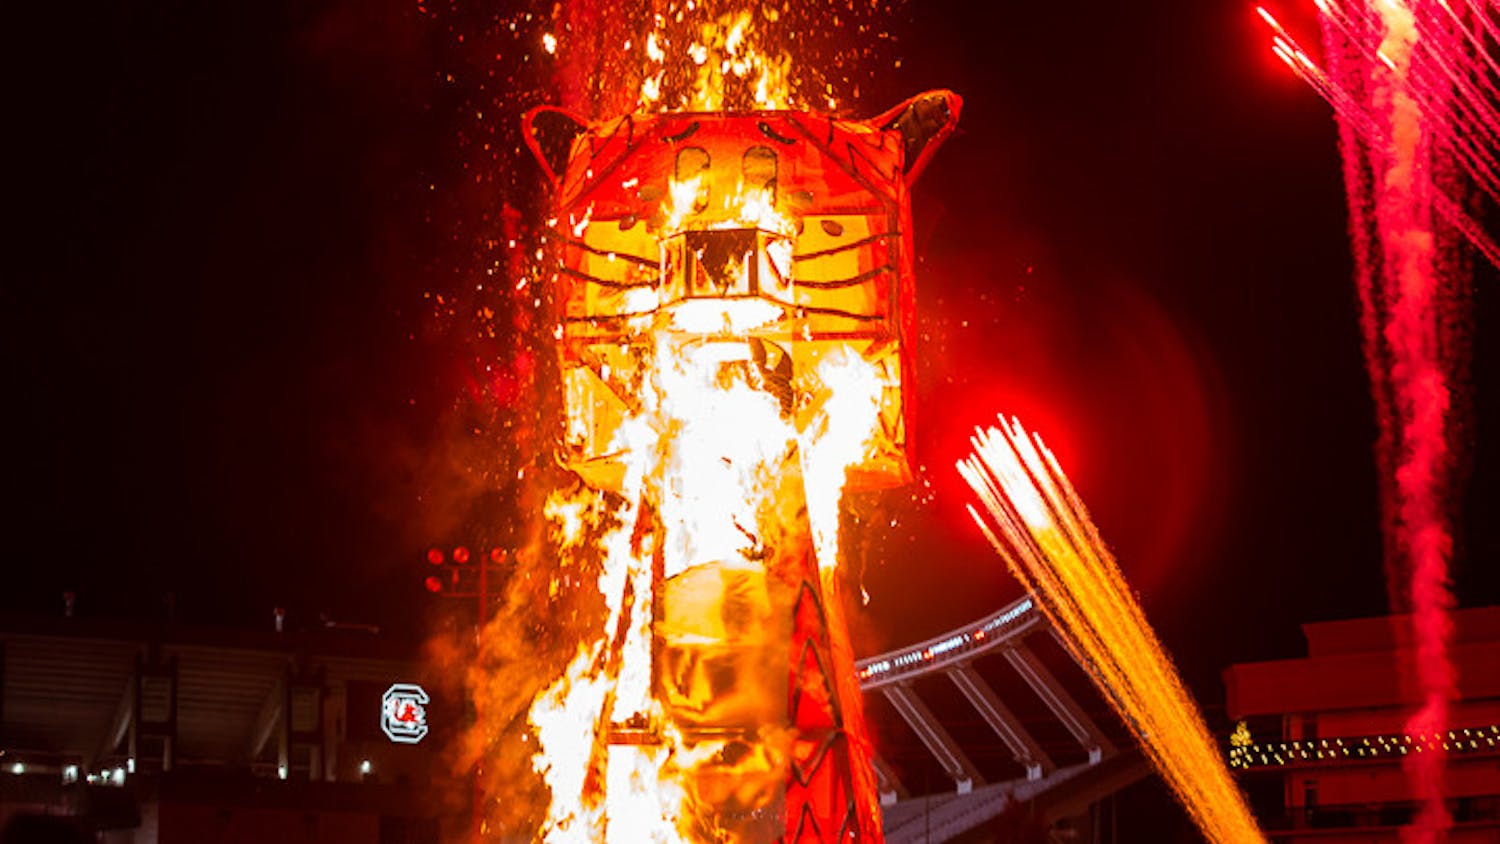 The blaze begins as the flames quickly catch and spread throughout the 32.5-foot-tall Celmson Tiger Statue. Fireworks are set off in the background for added effect.